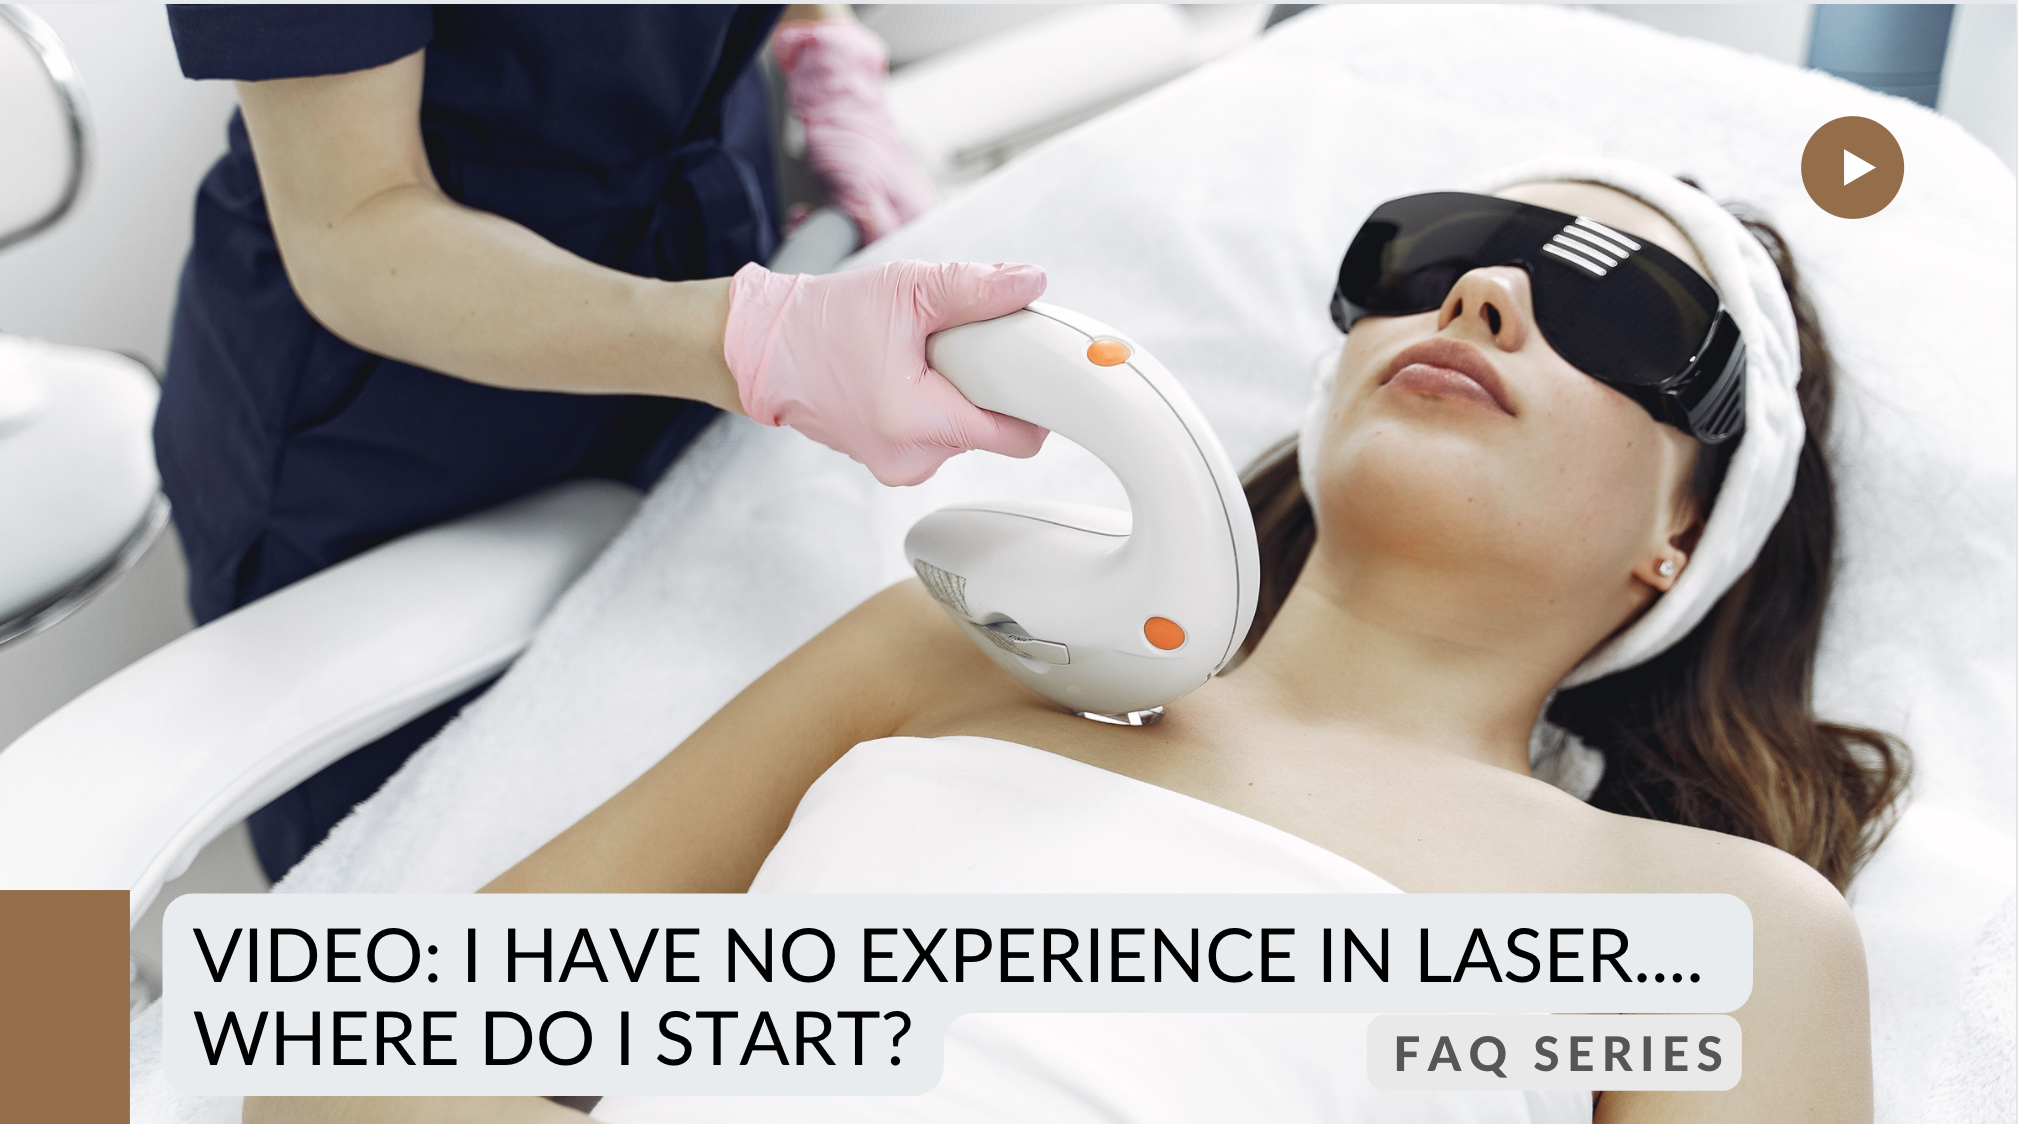 I have no experience in laser, where do I start?